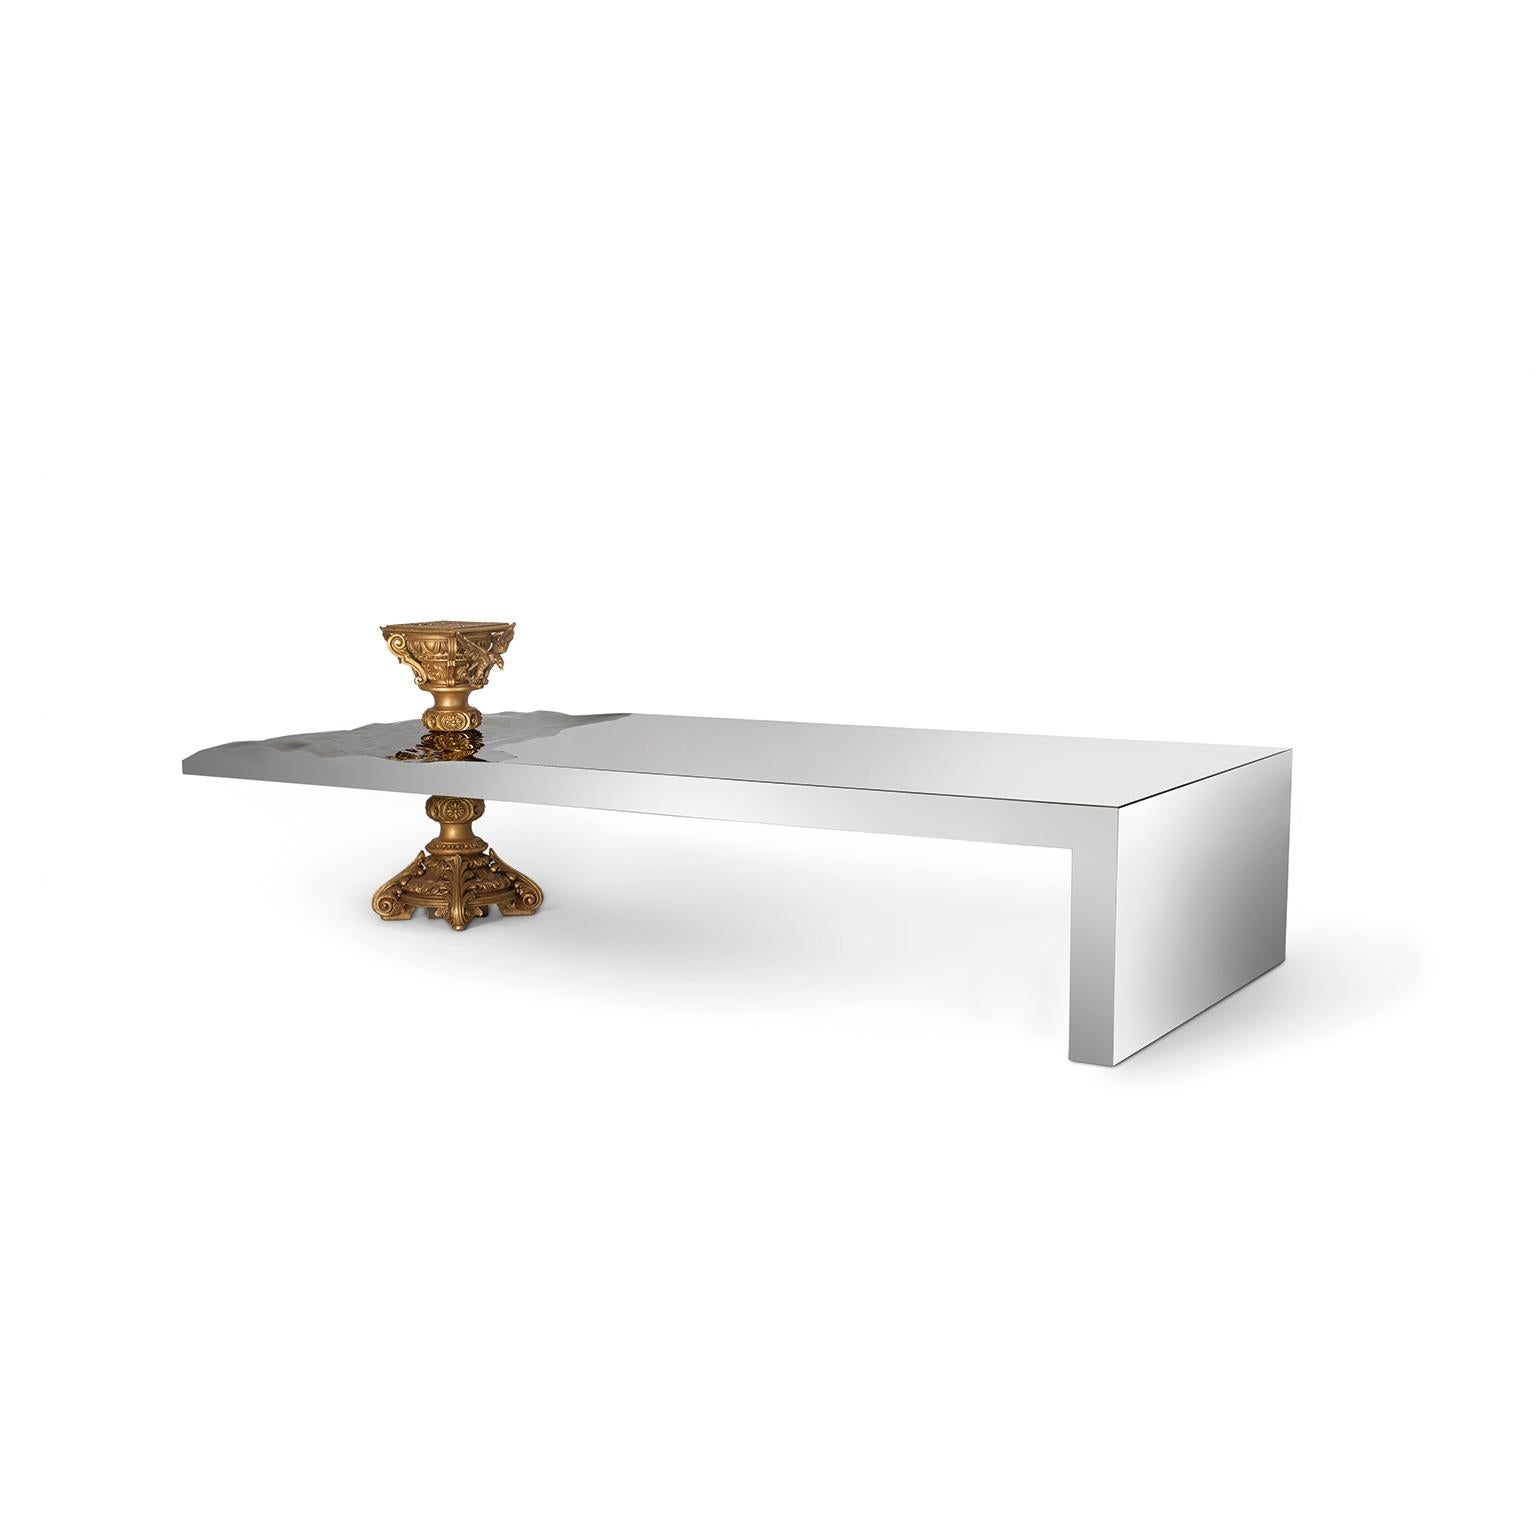 Portuguese Modern New Era Coffee Table, Carved Wood with Fine Gold Leaf and Polished Inox  For Sale